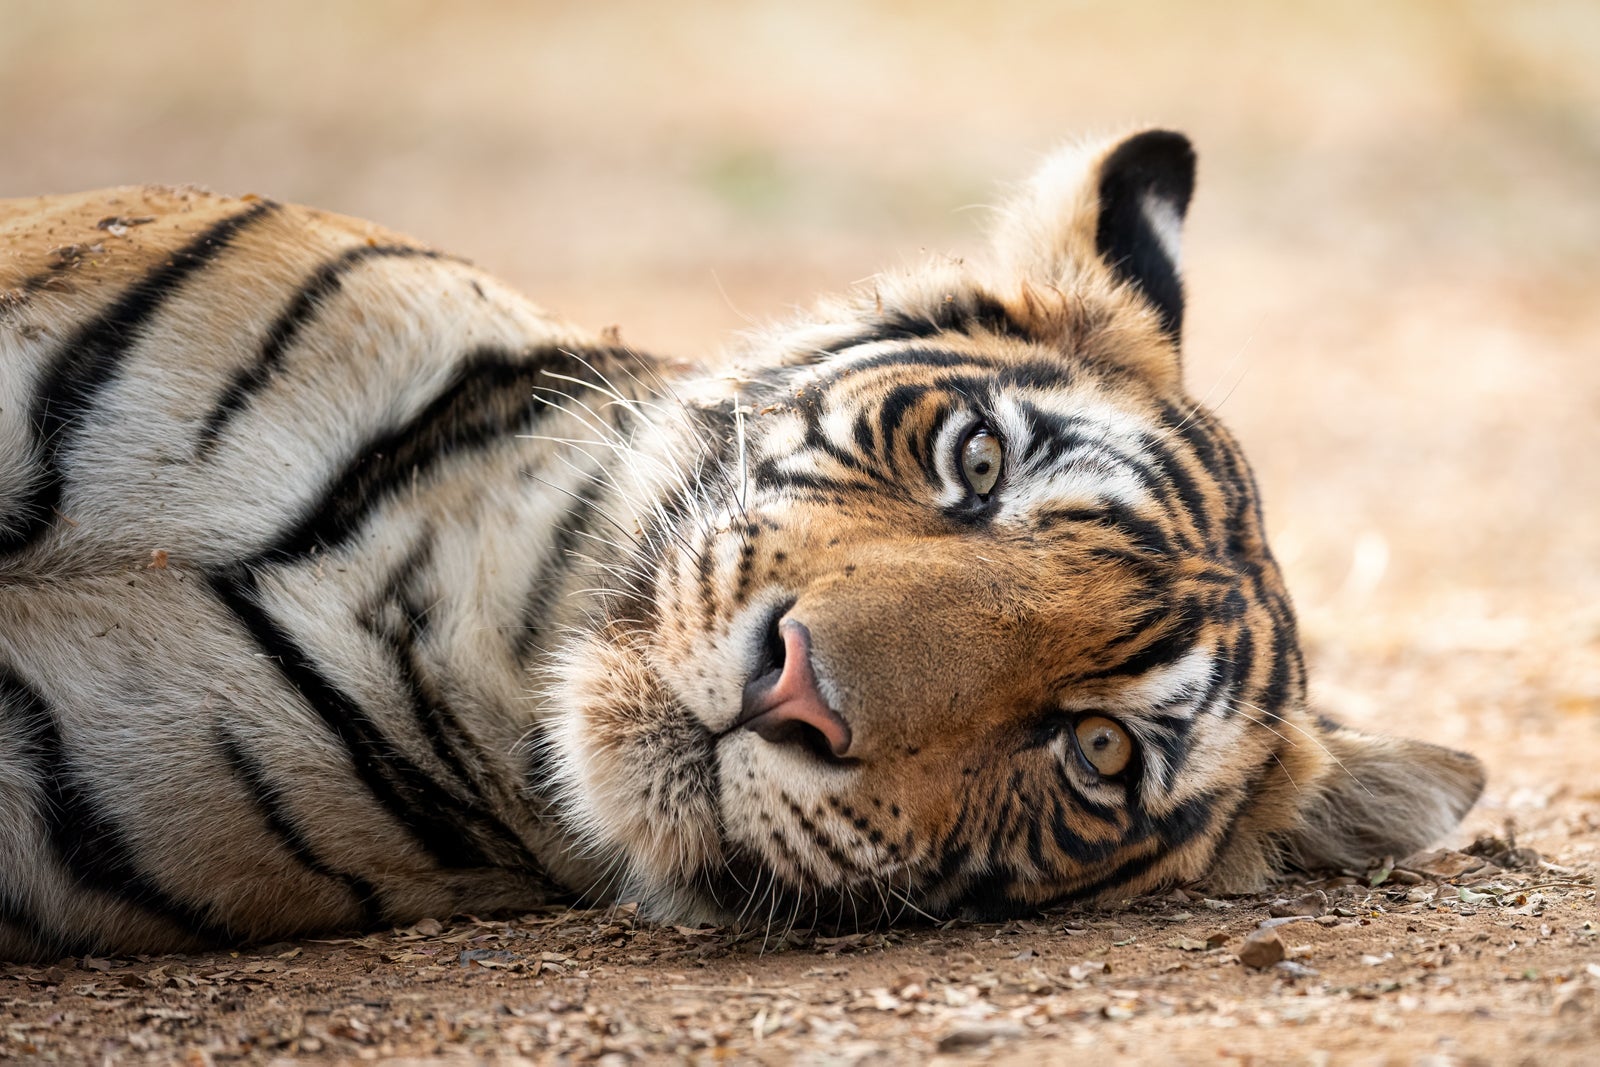 A Bengal Tiger in Ranthambore National Park